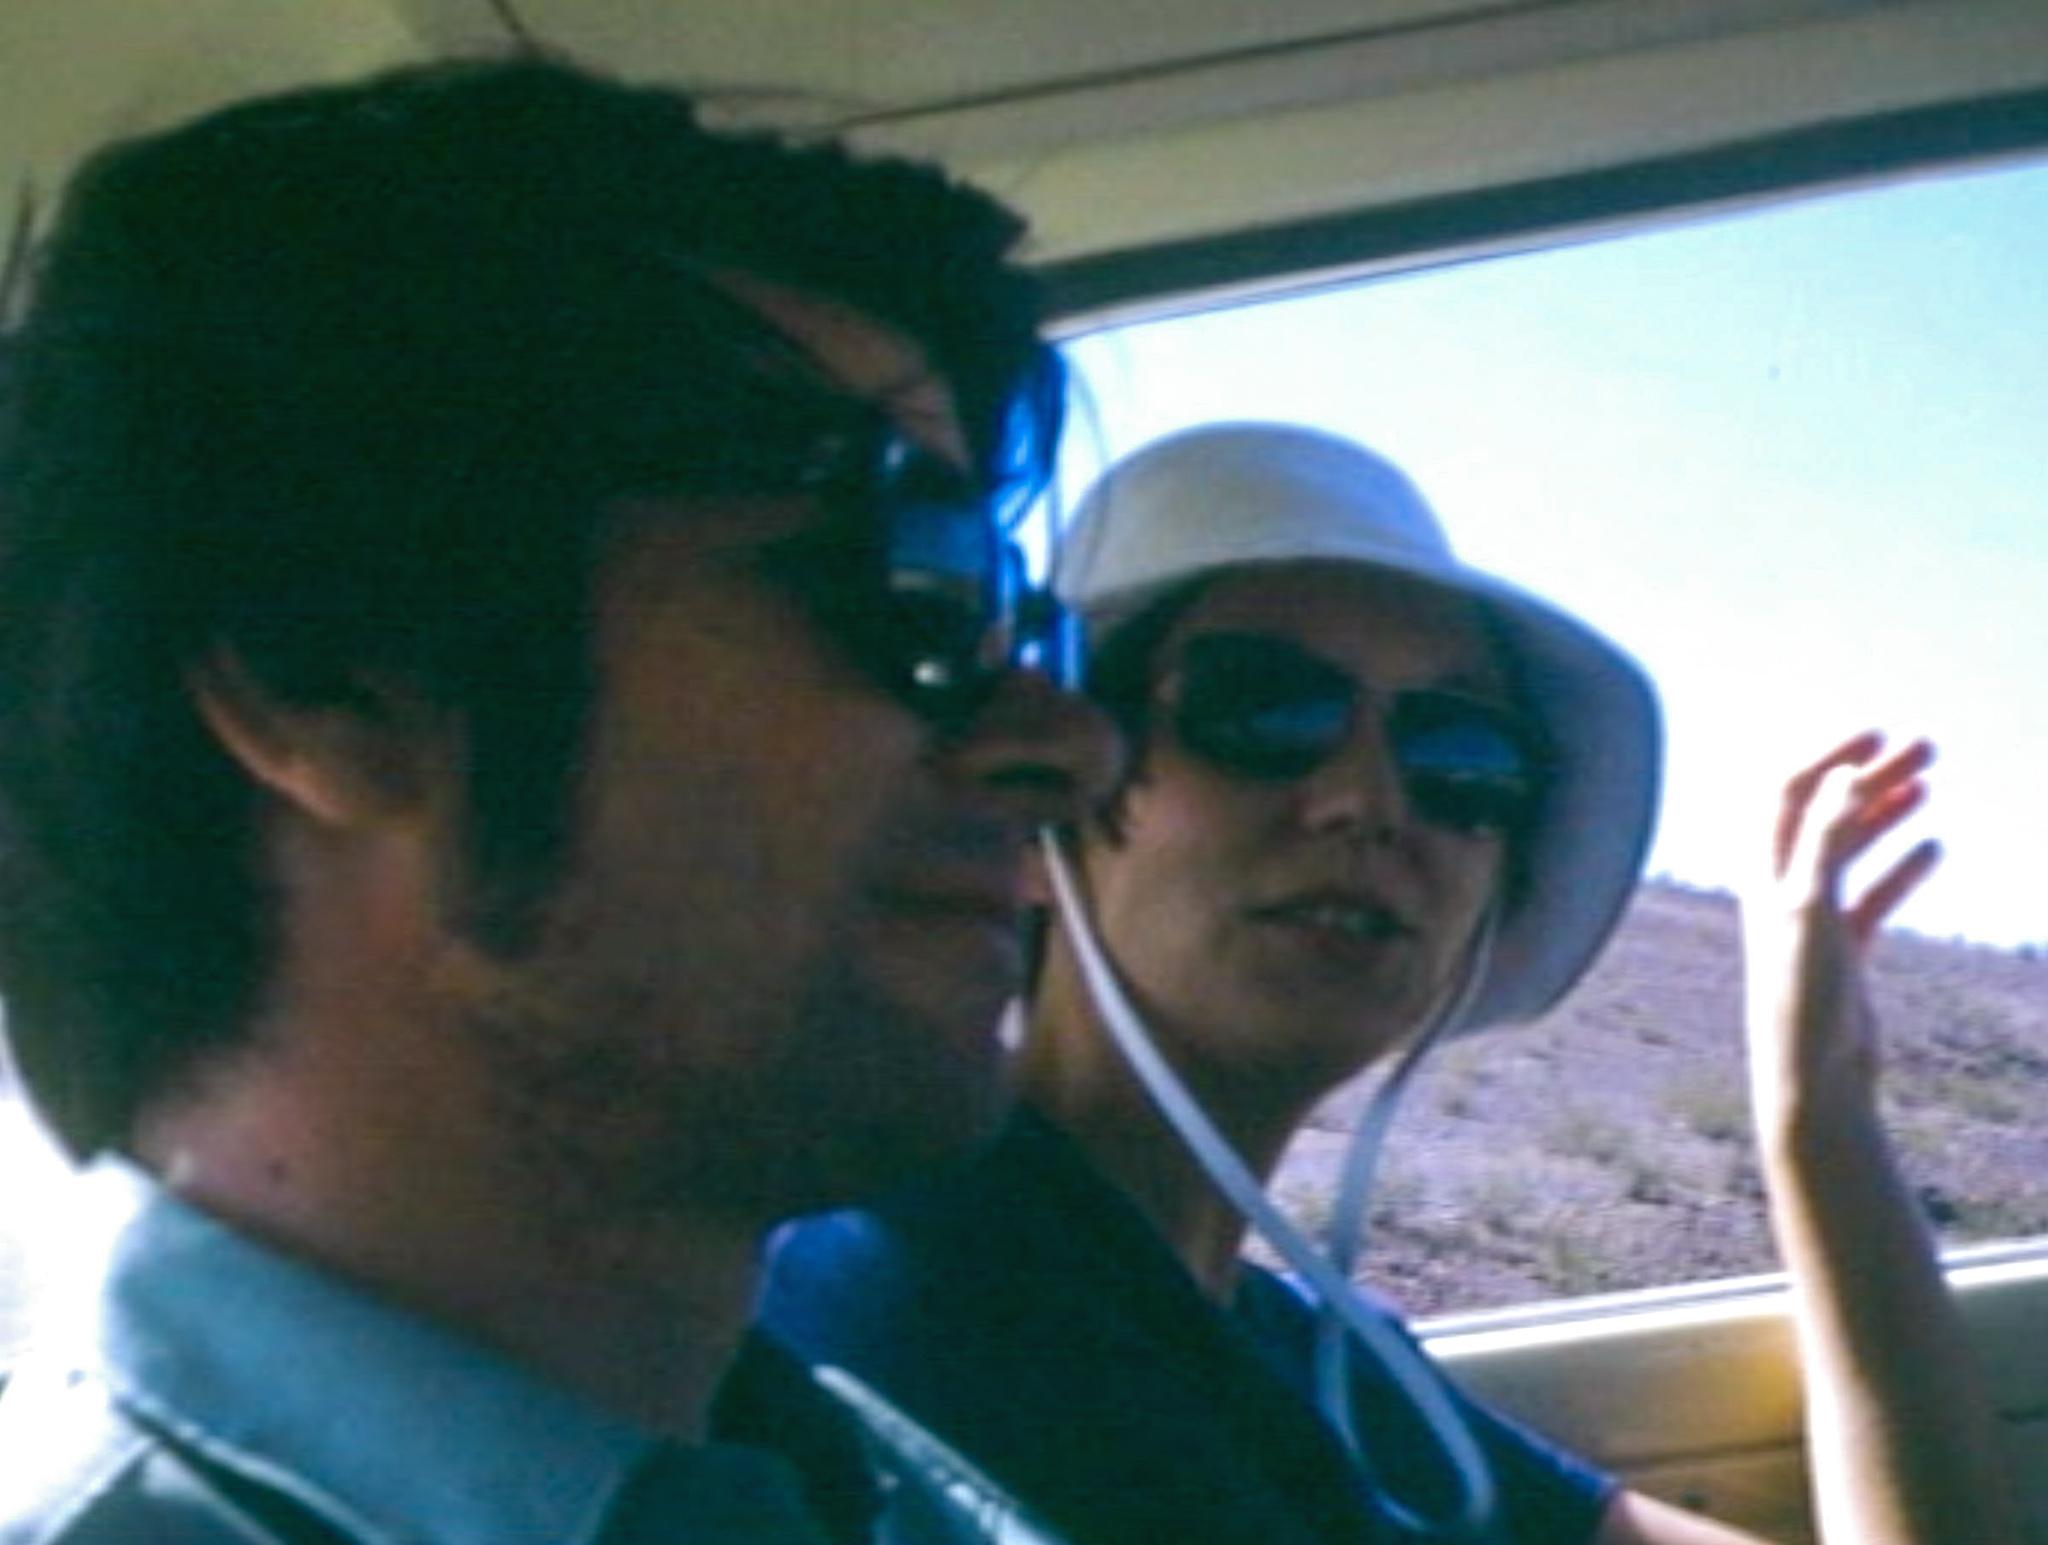 A young man and woman riding side by side in the backseat of a car.